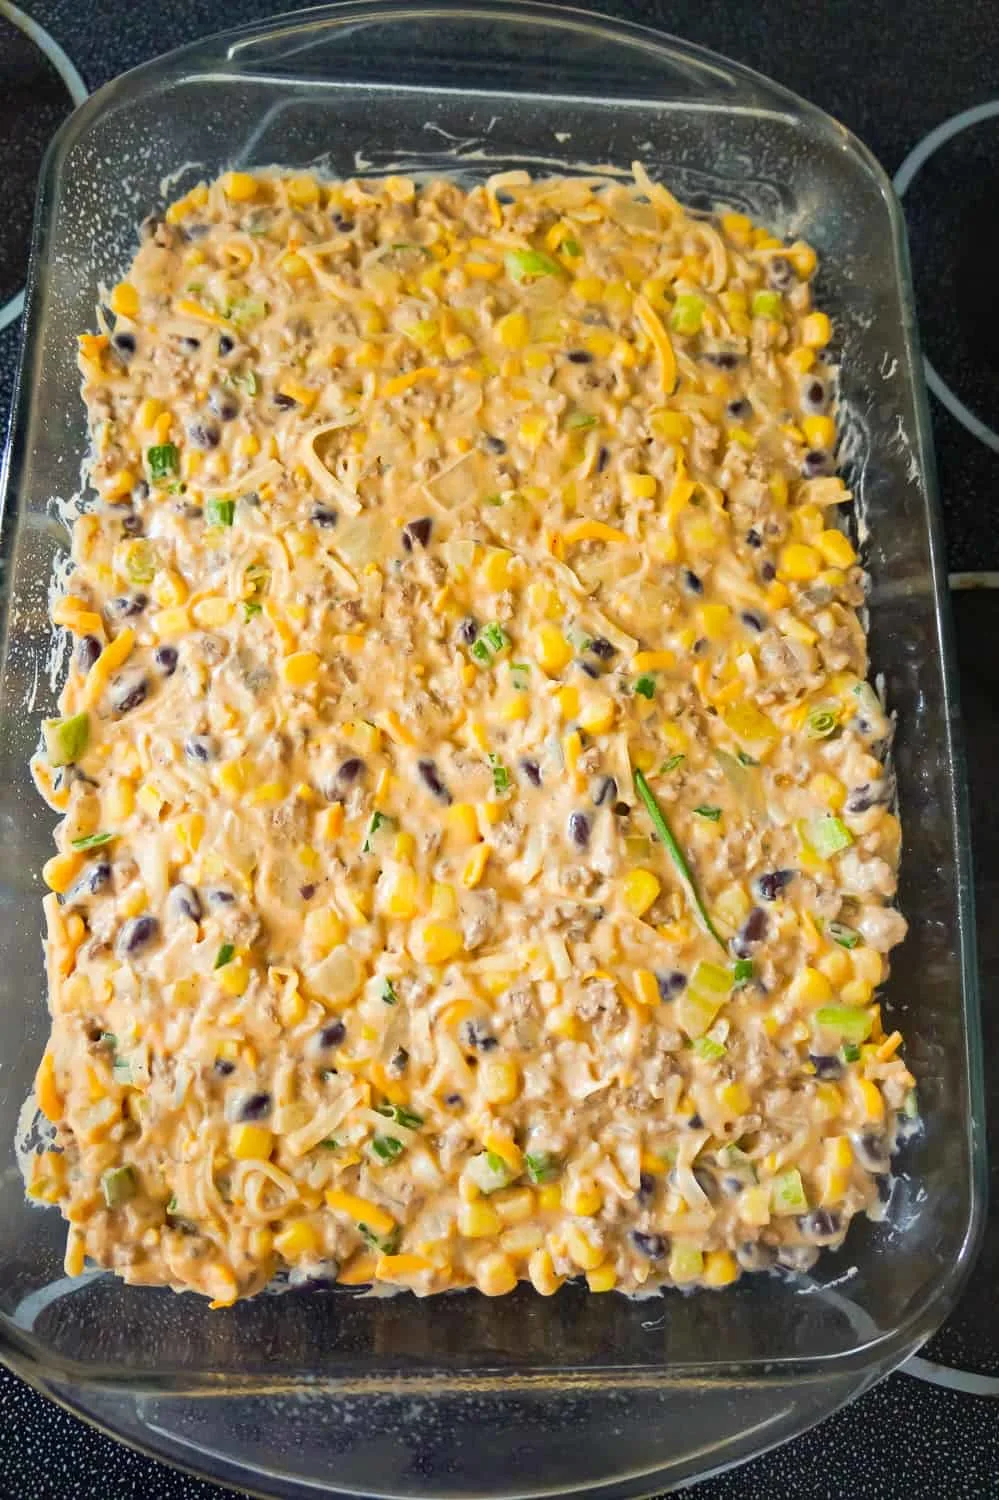 ground beef mixture with corn and black beans pressed into a 9 x 13 inch baking dish